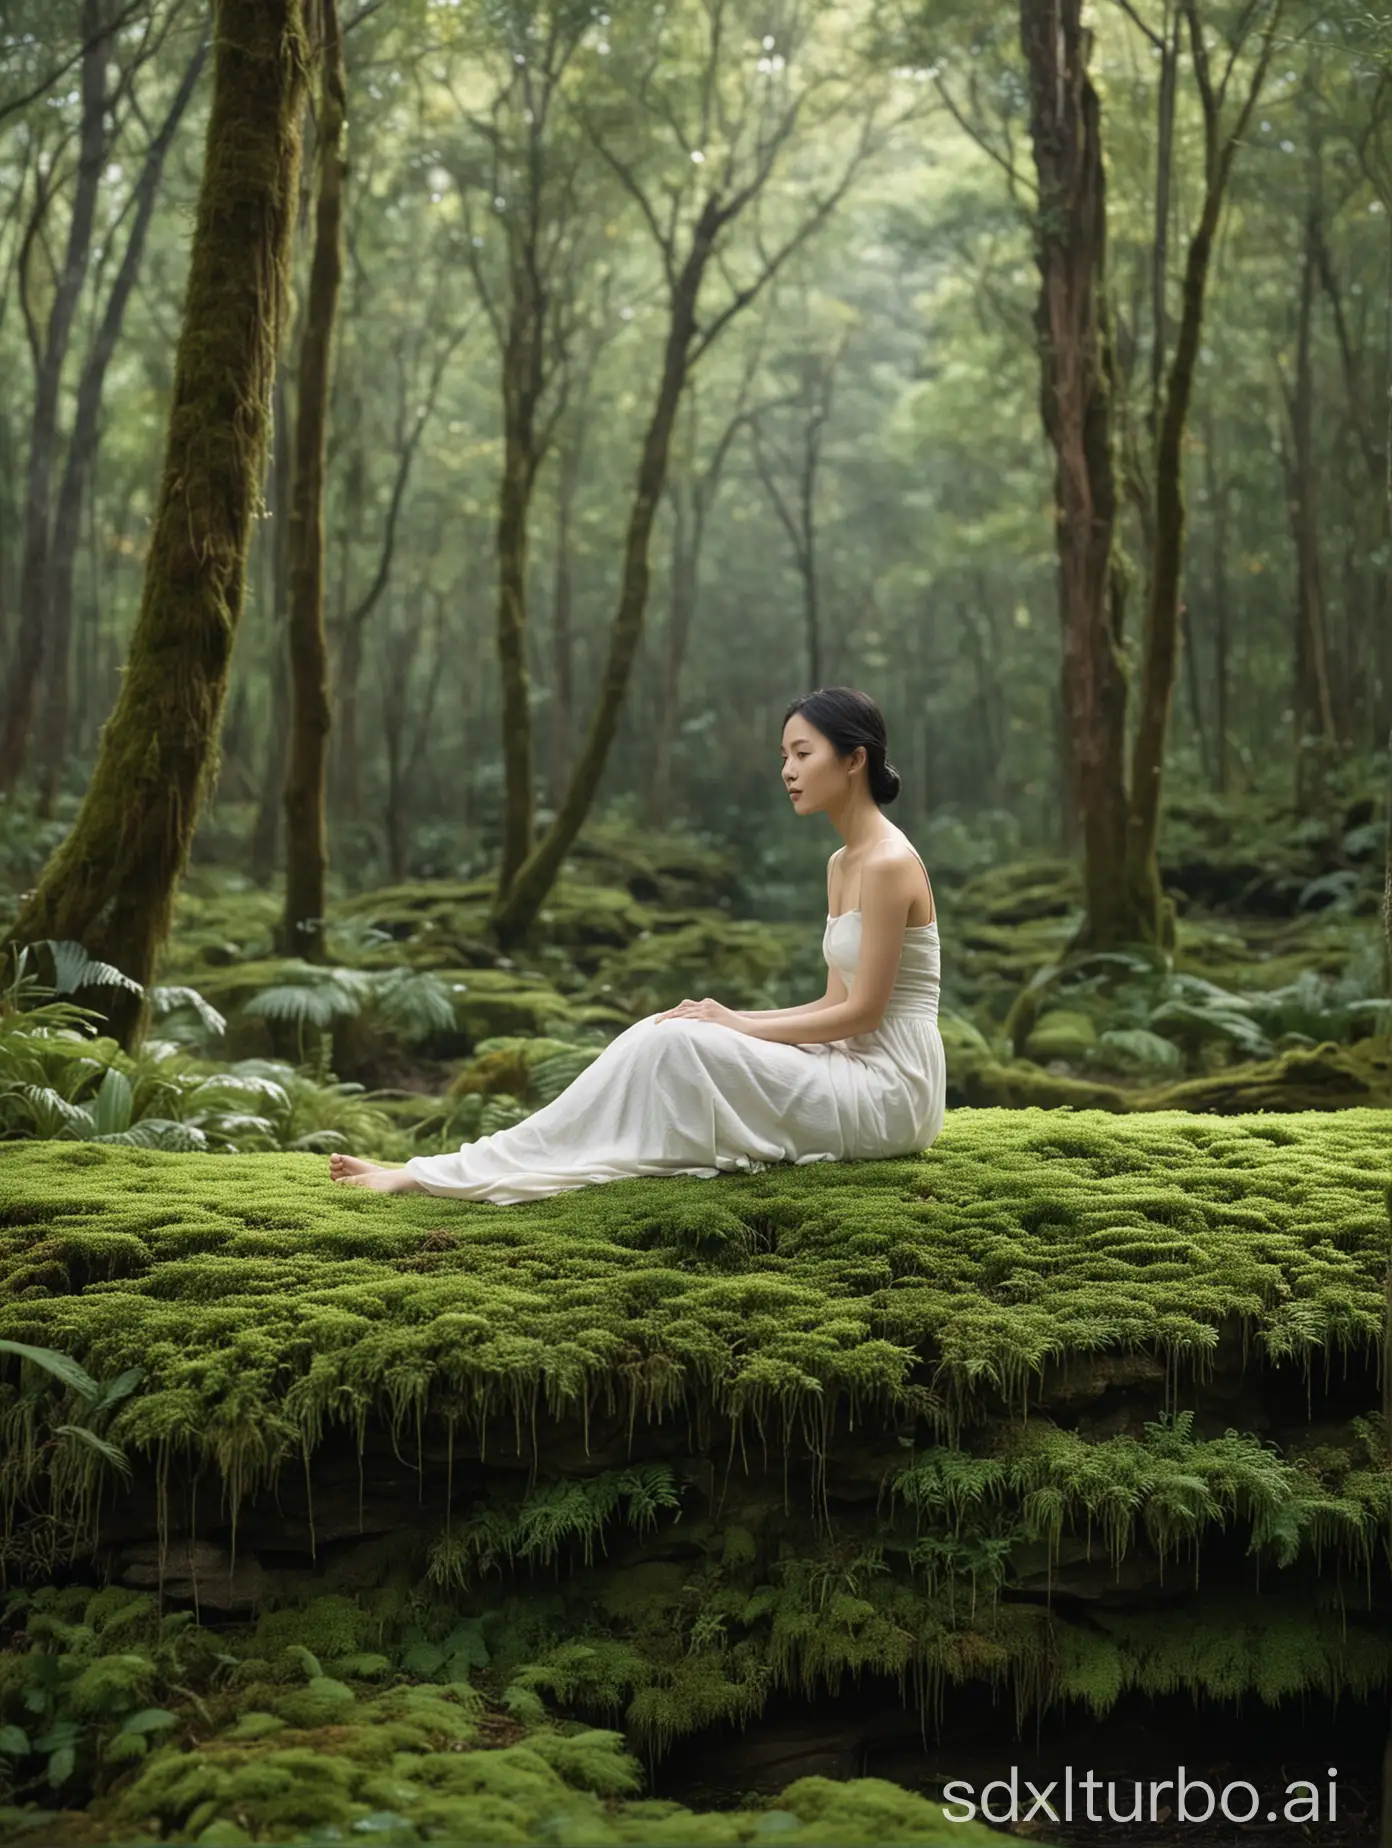 Tranquil-Asian-Woman-Sitting-on-MossCovered-Platform